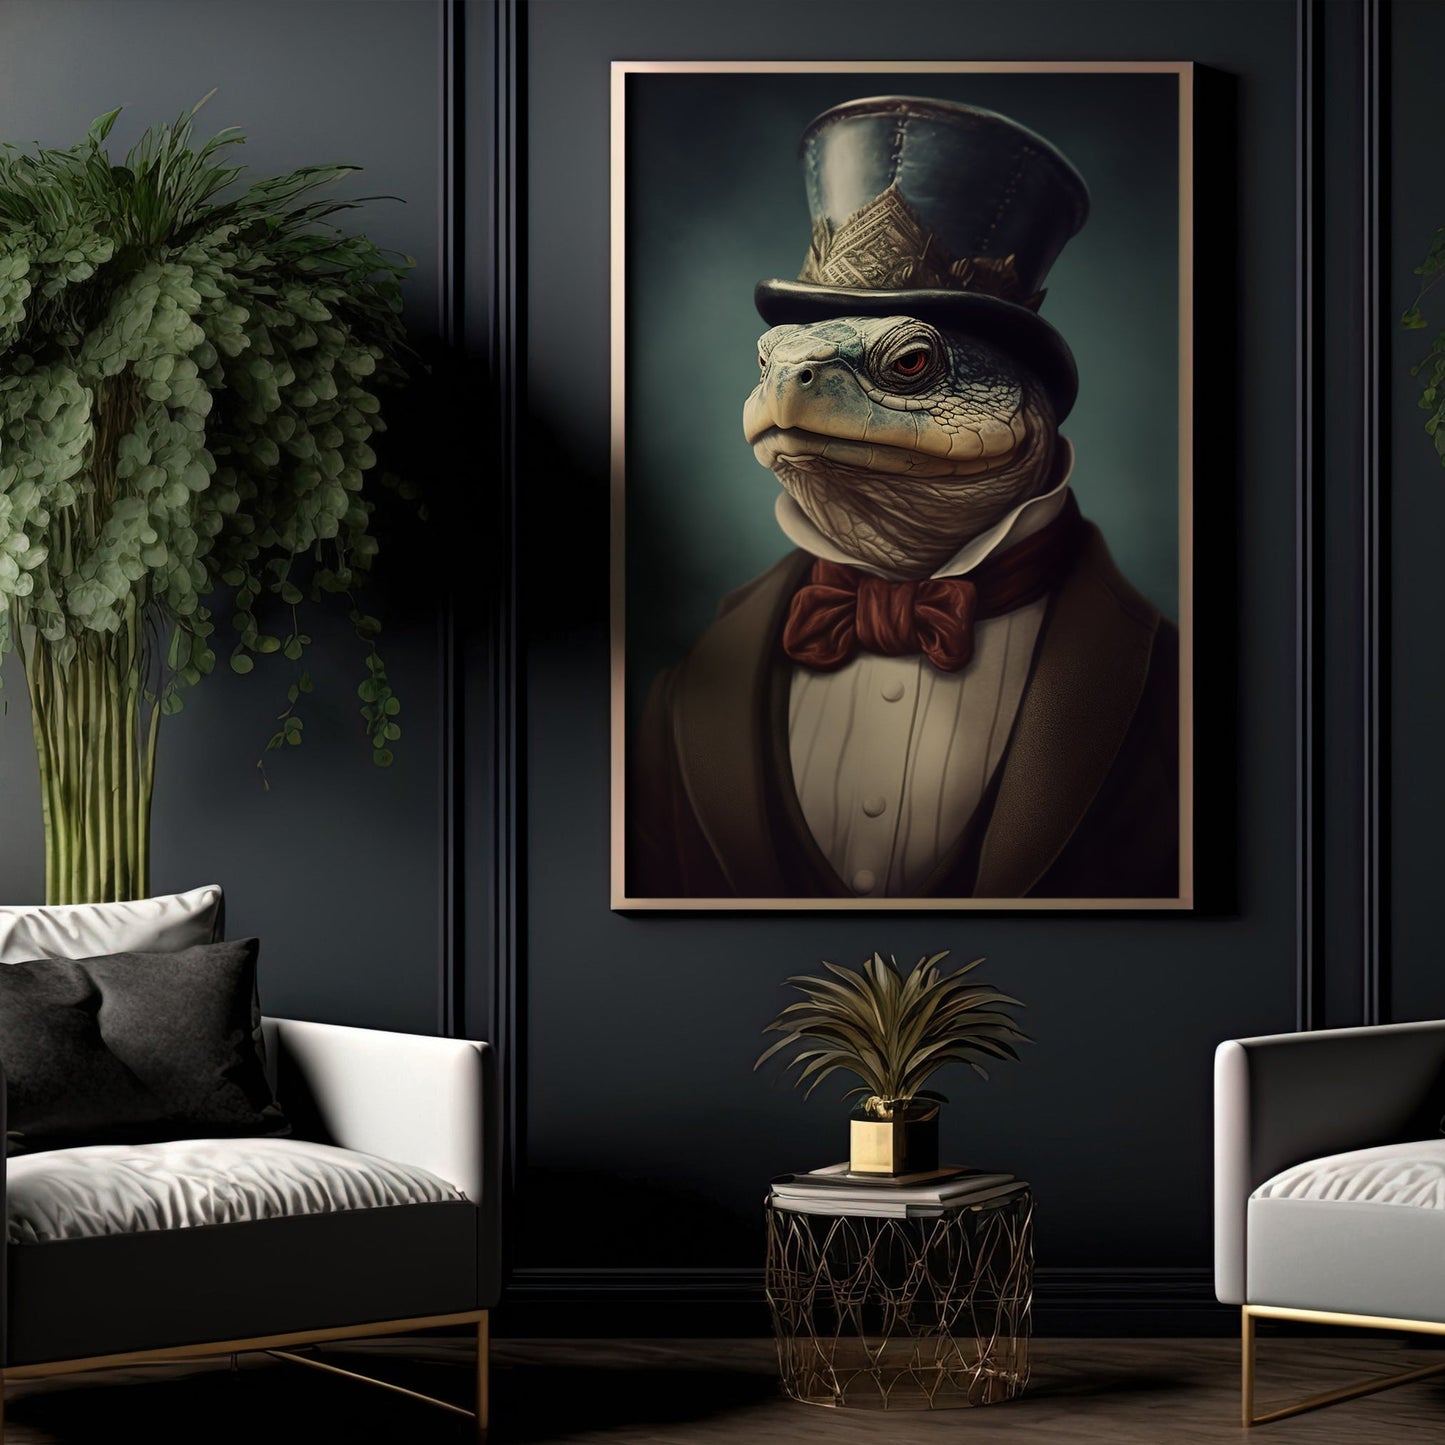 Sea Turtles In Victorian Suit, Victorian Sea Turtle Canvas Painting, Victorian Animal Wall Art Decor, Poster Gift For Sea Turtle Lovers